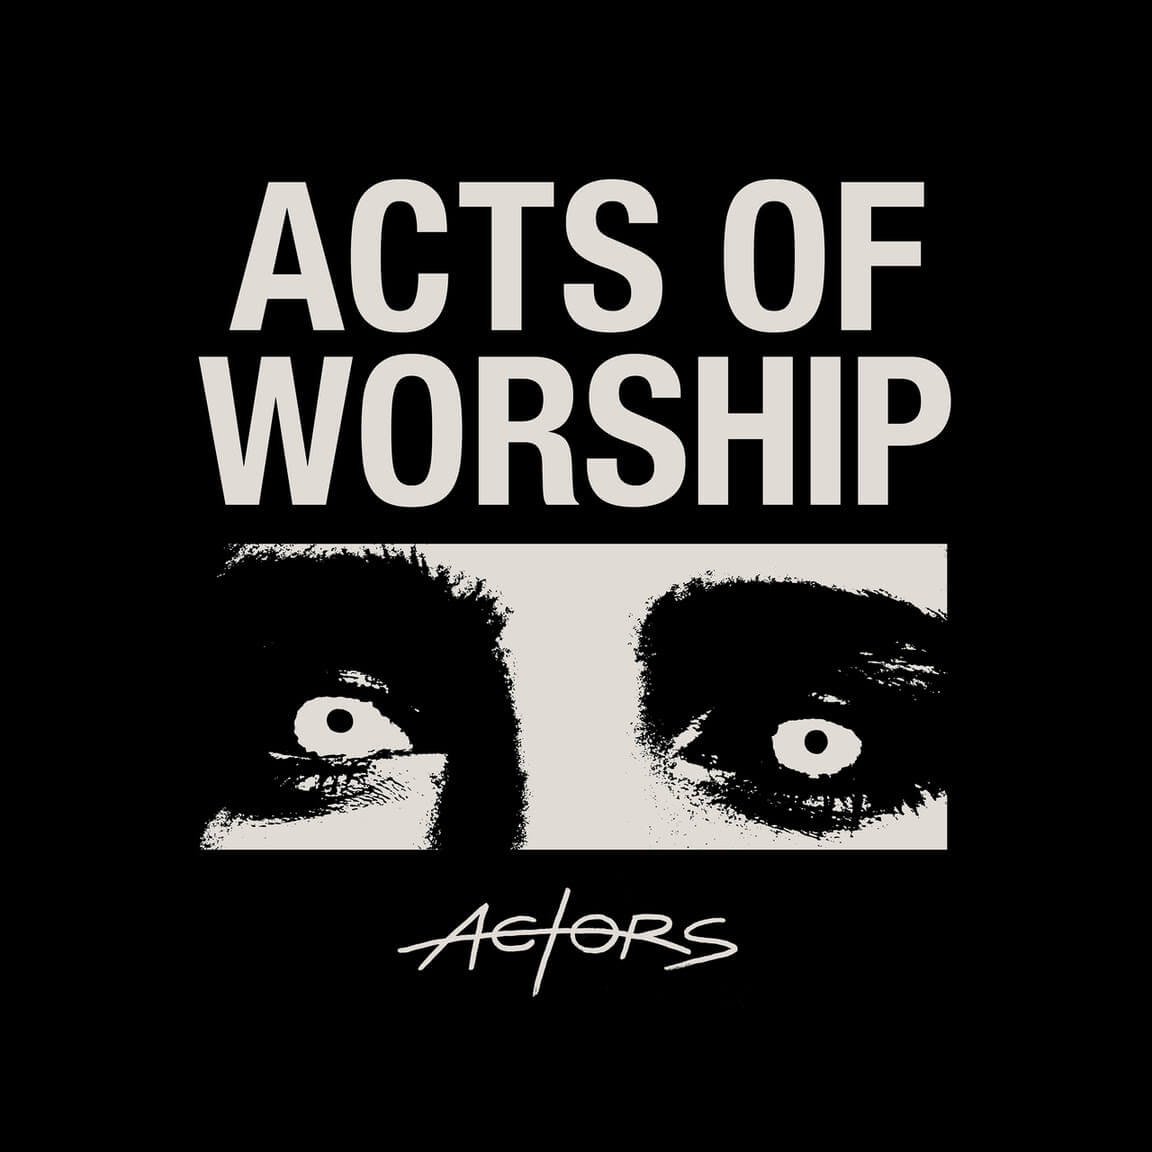 Acts of Worship by Actors Album review by Greg Walker for Northern Transmissions